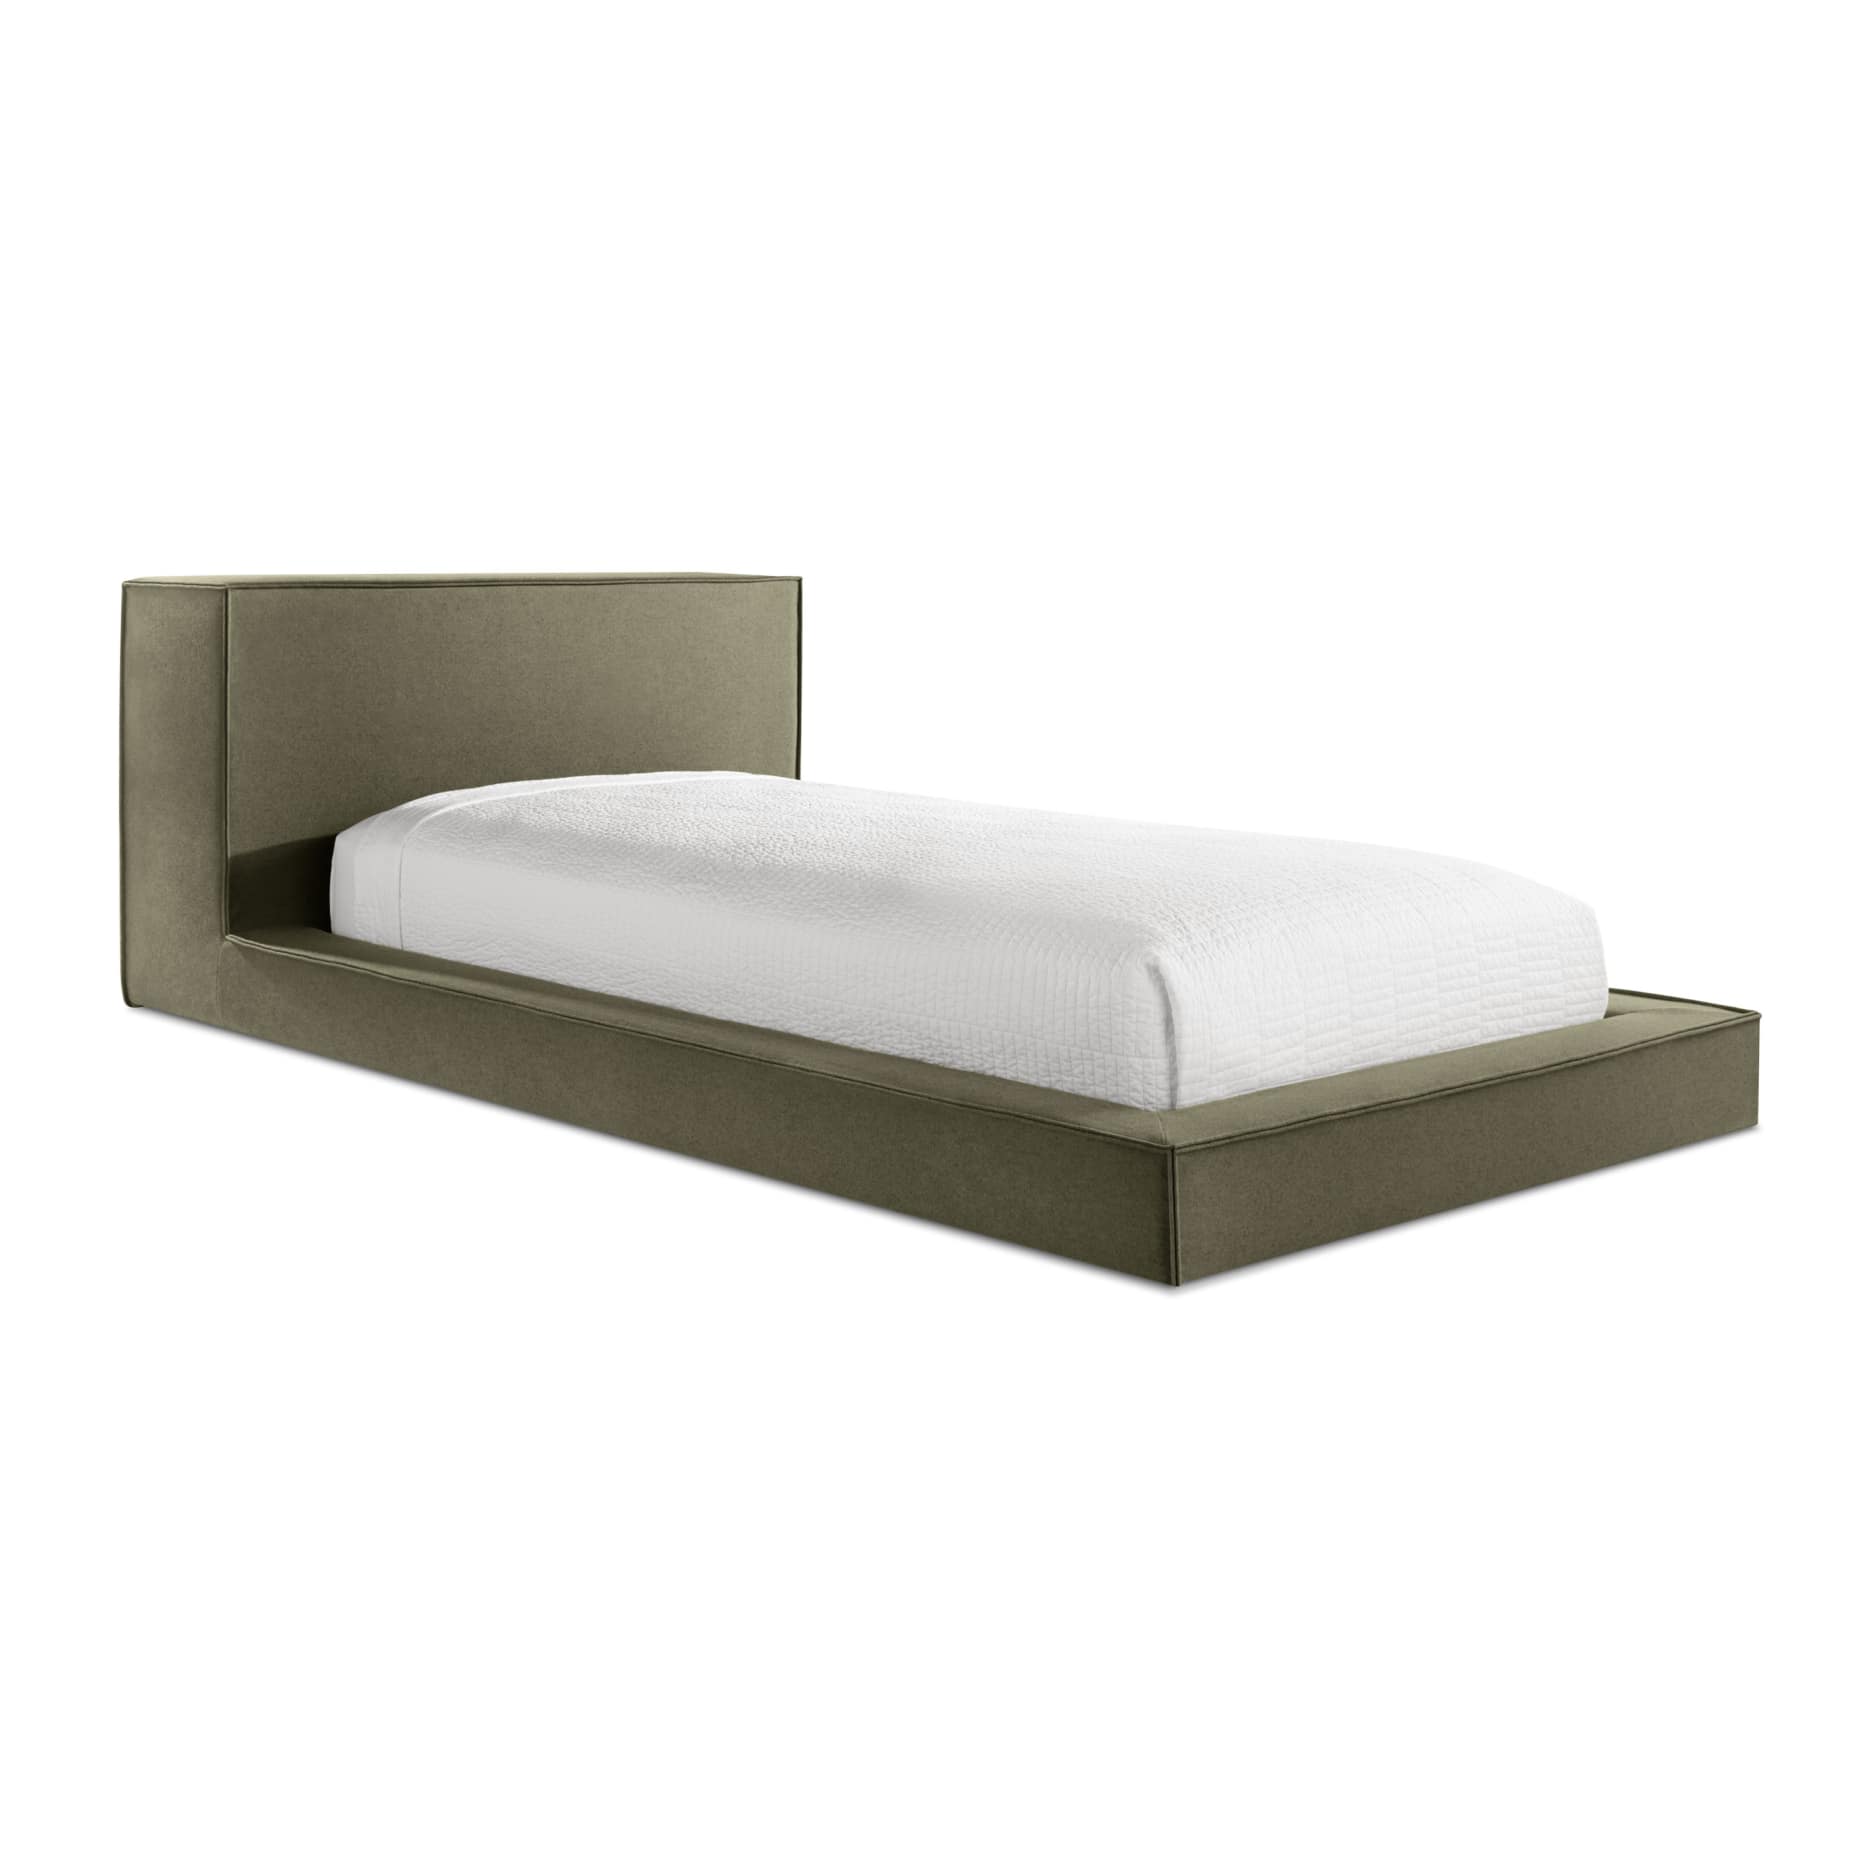 Dodu Twin Bed D3 Home Modern, Contemporary Twin Bed Frame